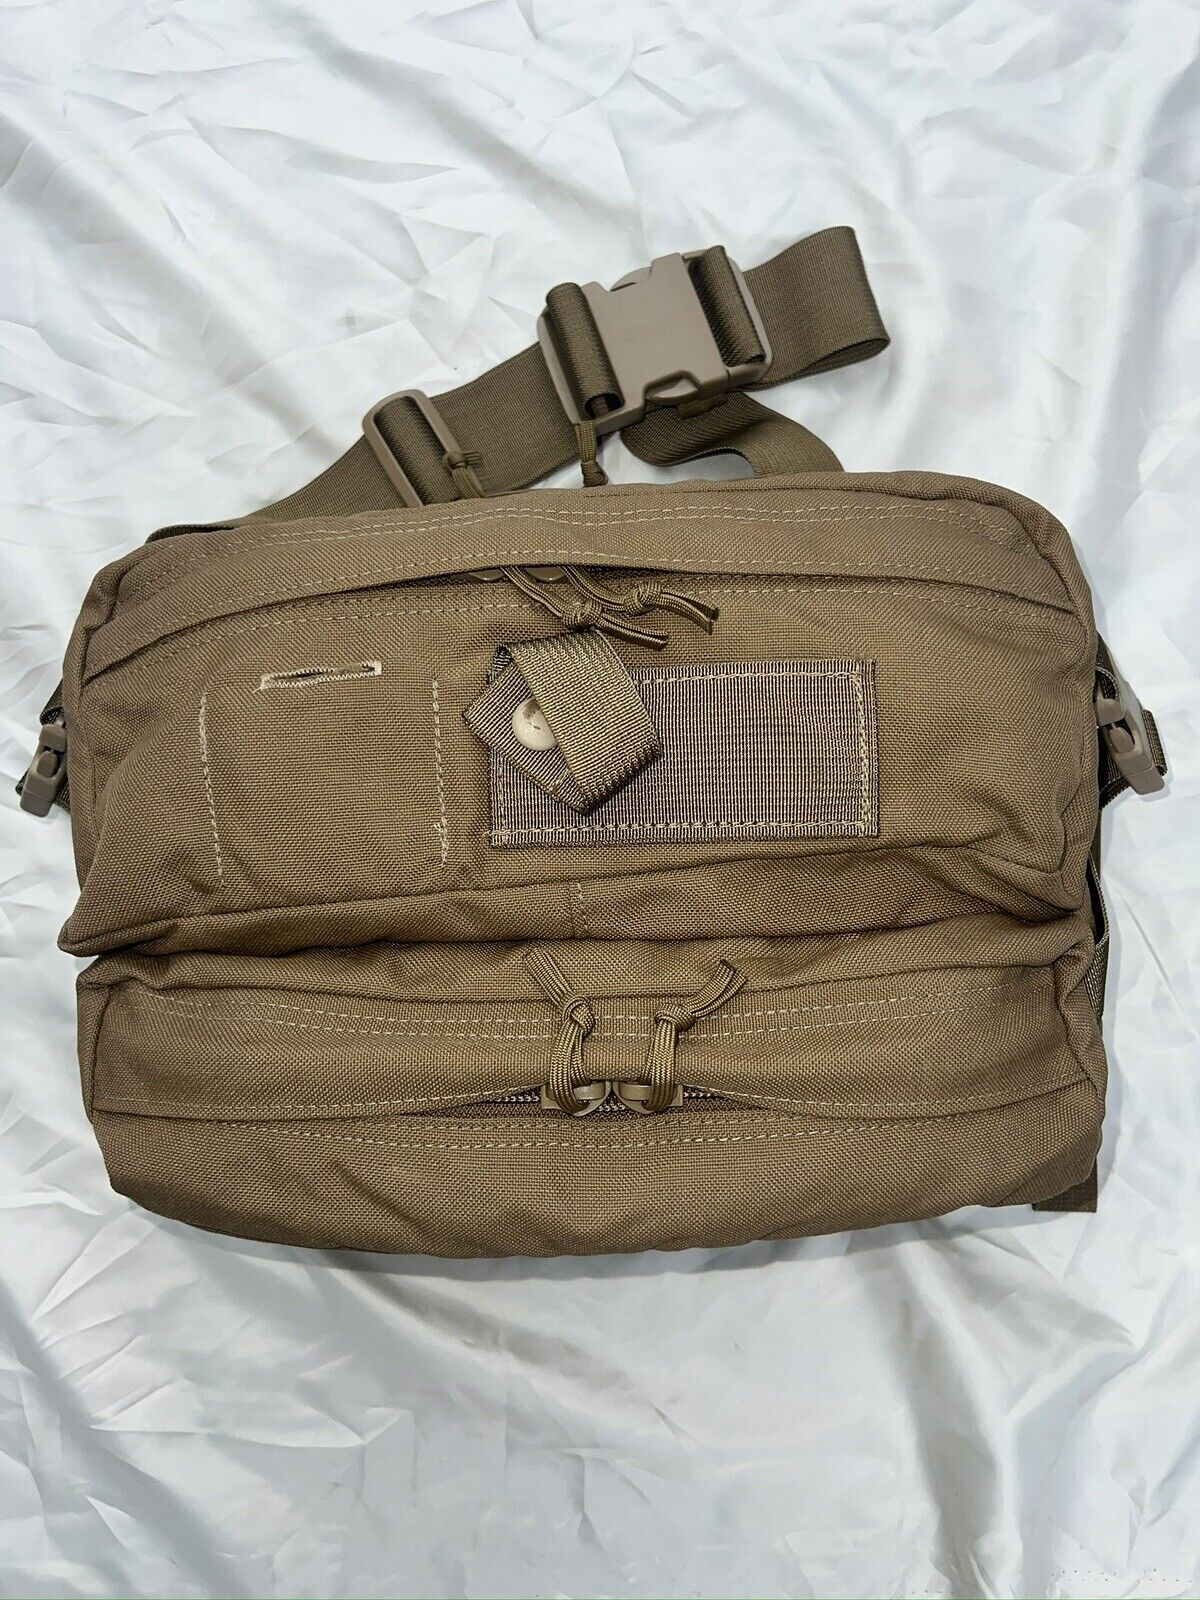 London Bridge Trading LBT-1528L Medical Fanny Pack Coyote Brown Excellent Cond